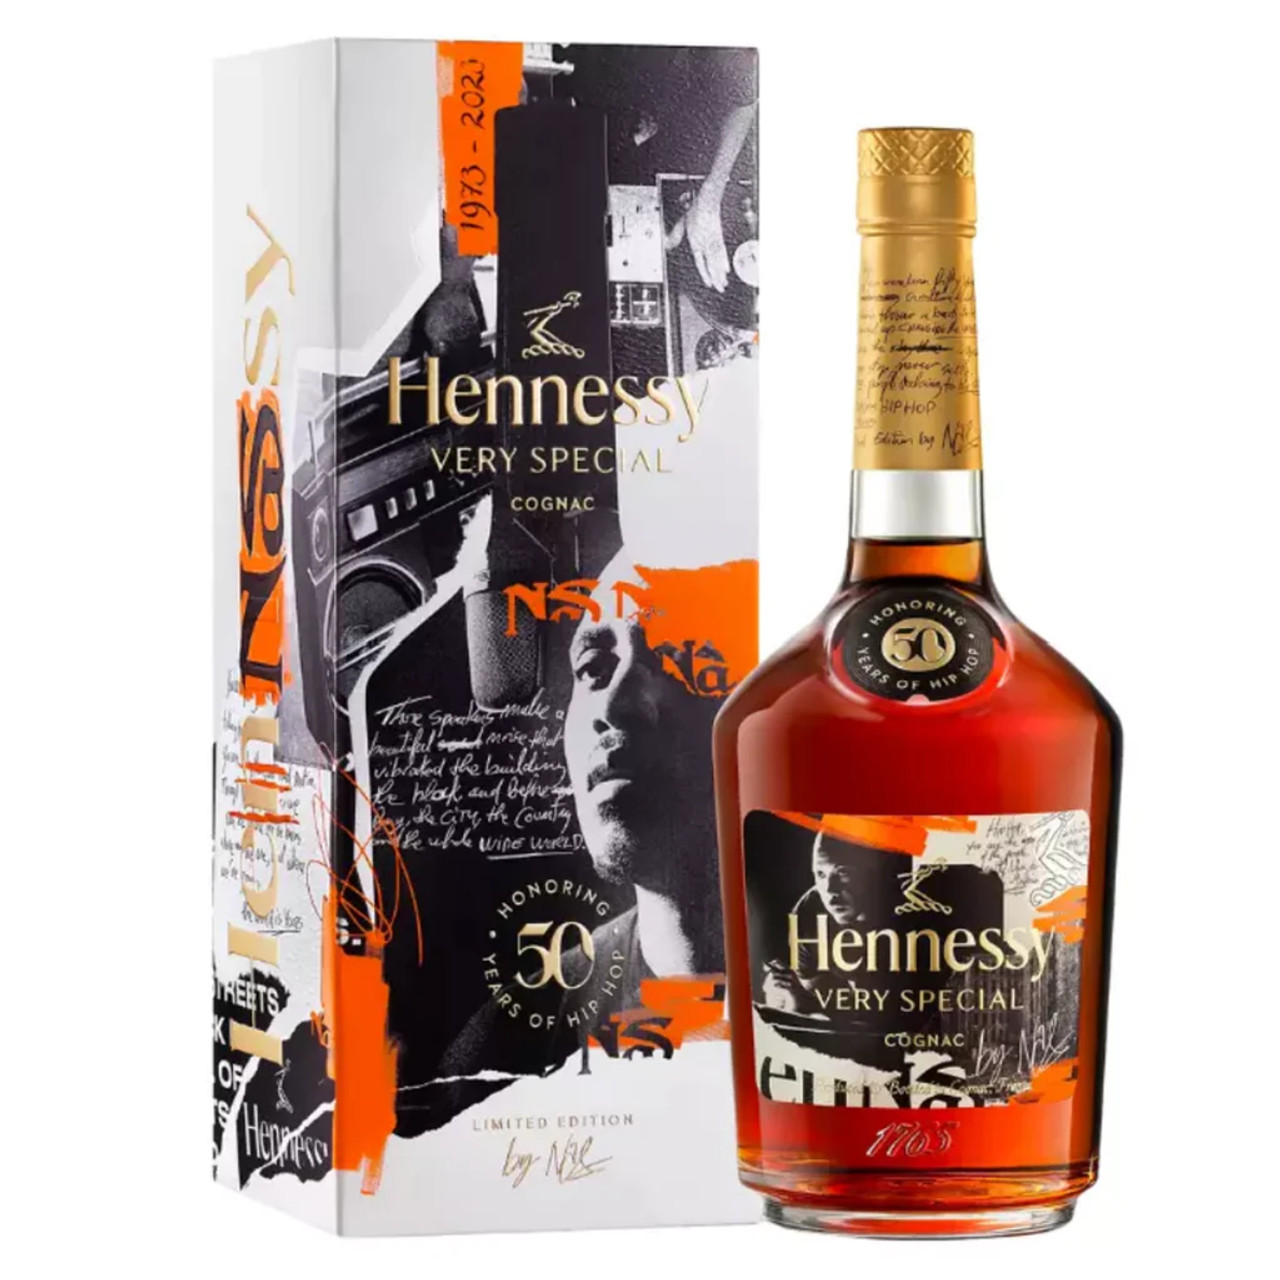 HENNESSY V.S.O.P RELEASES LIMITED EDITION DESIGN BY GLOBAL